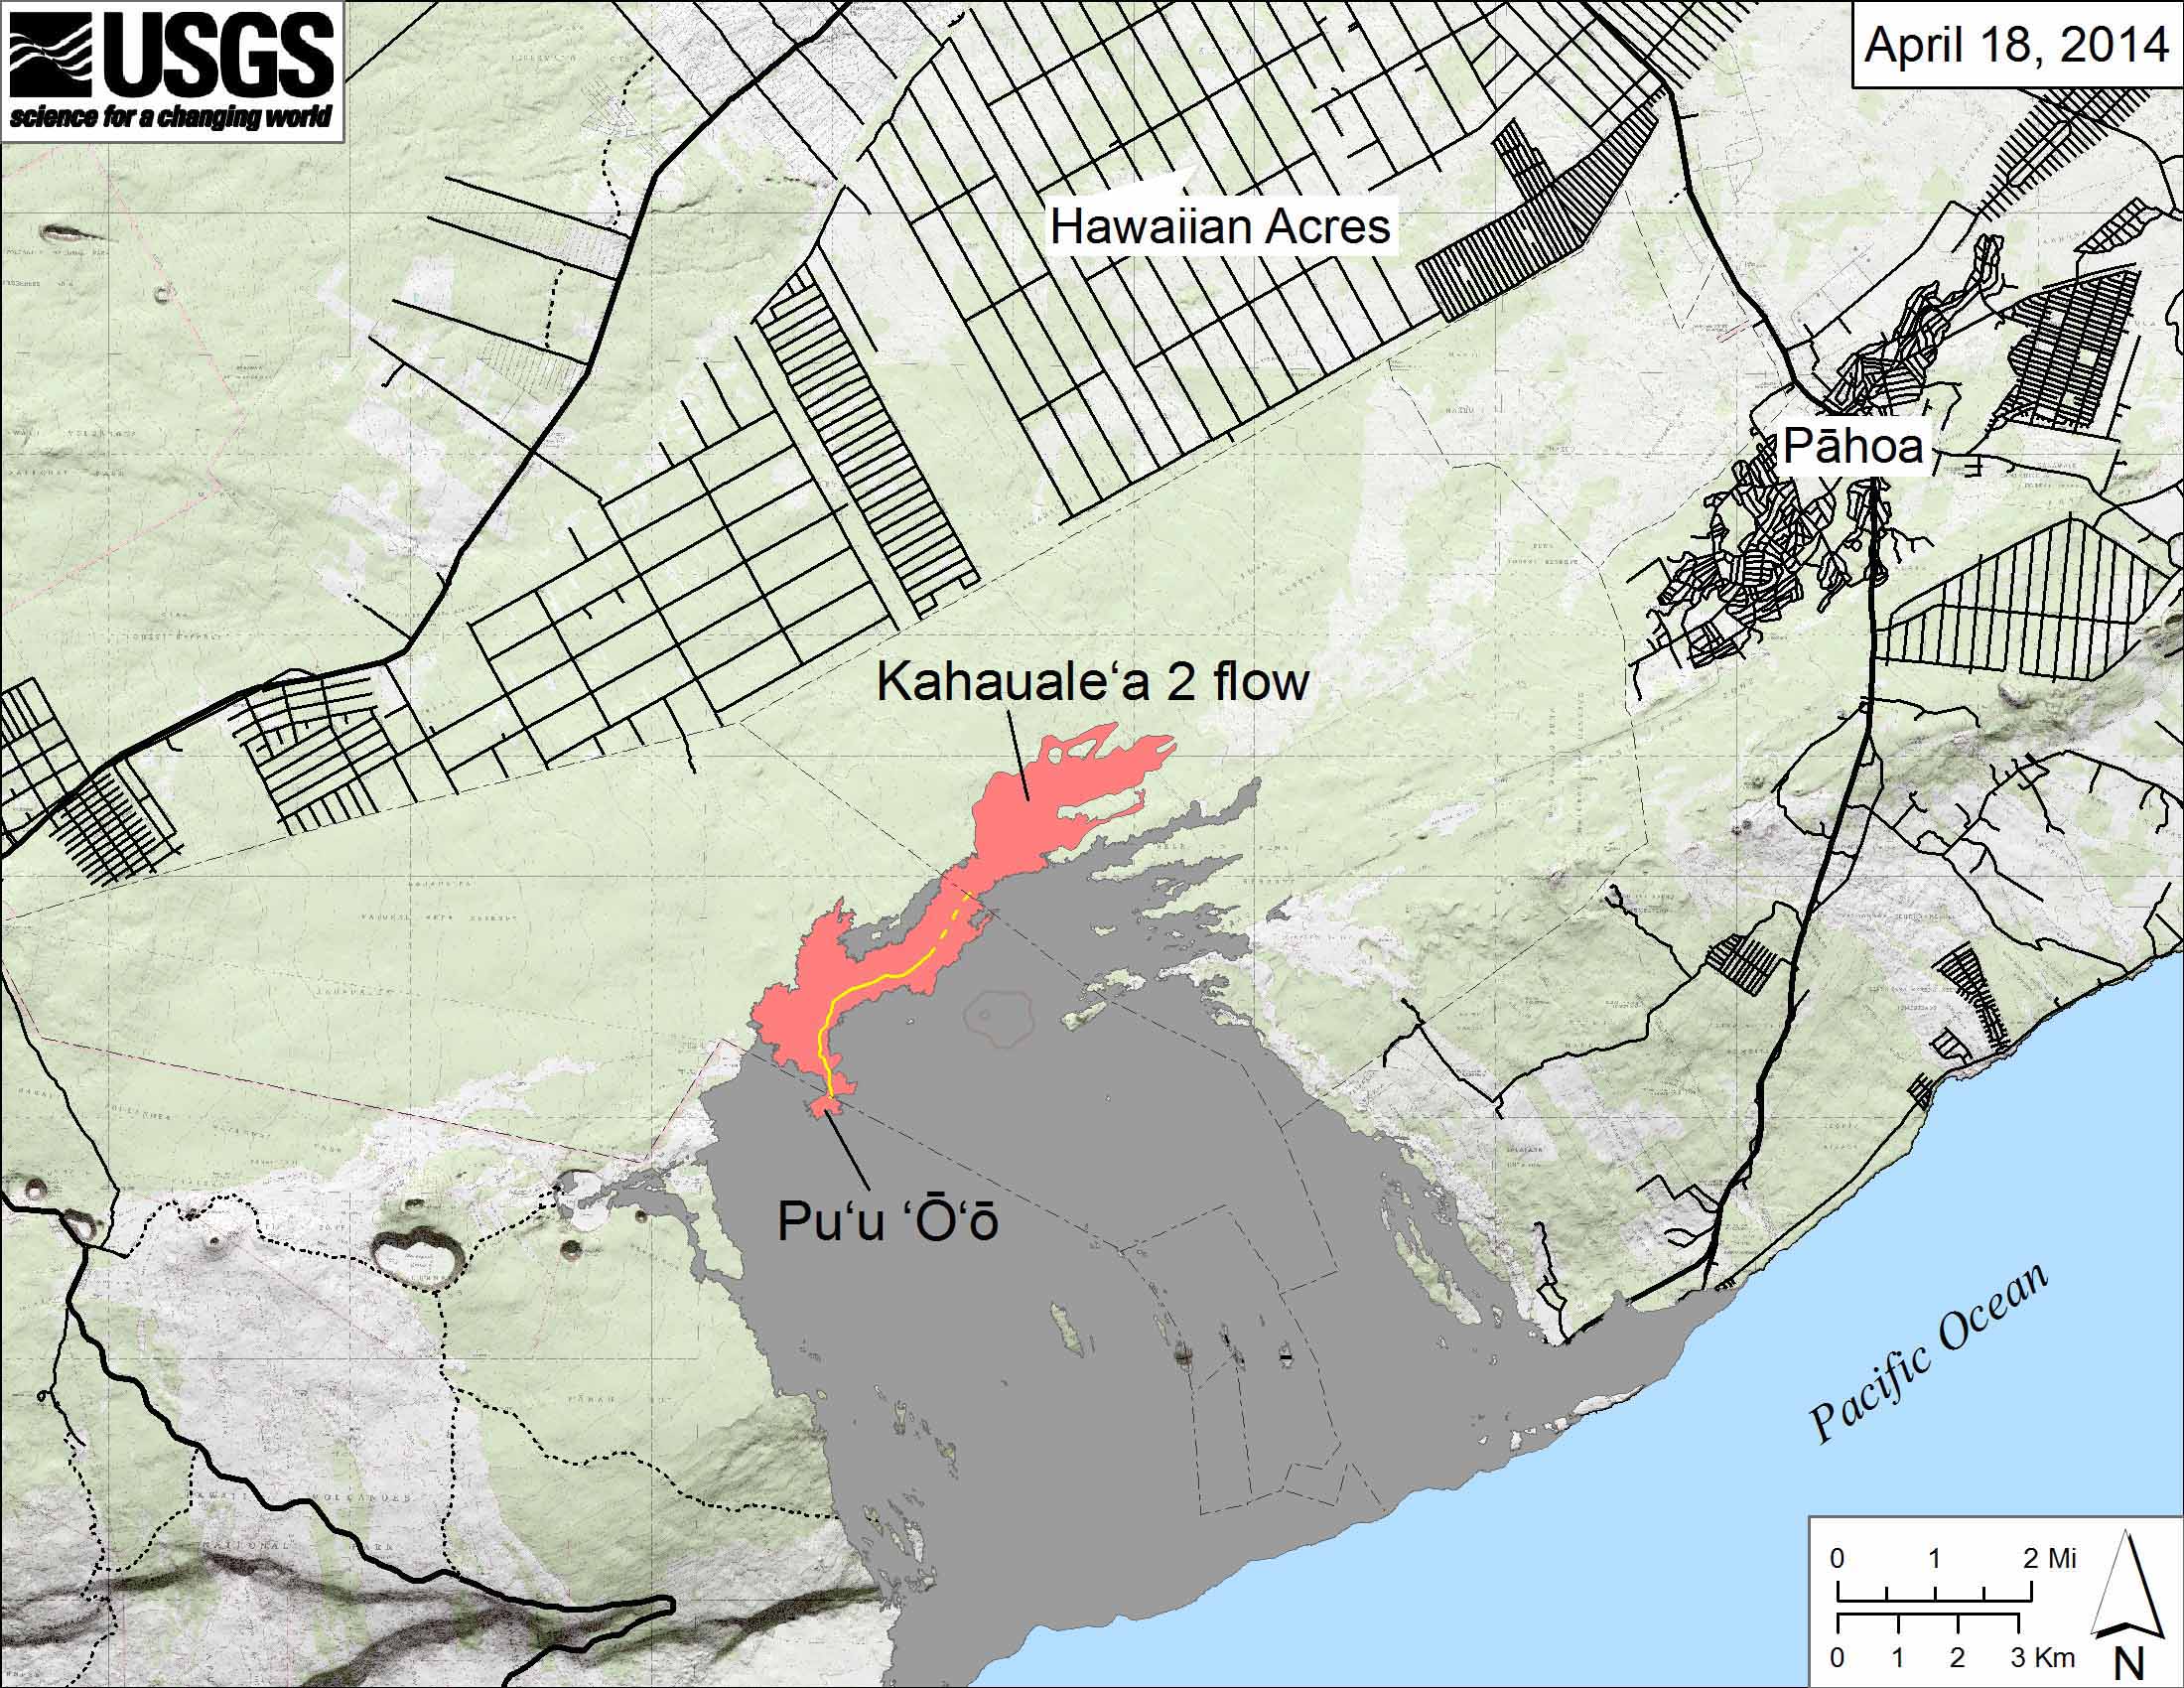 The Kahaualeʻa 2 lava flow, as of April 18, 2014, is shown in pink, with a yellow line indicating the active lava tube. The most distant active front of the flow retreated over the past week, probably in response to a DI event.  The area covered by older lava flows erupted from Kīlauea in 1983‒2013 is shown in gray.  An updated map is posted at http://hvo.wr.usgs.gov/maps/ after every Hawaiian Volcano Observatory overflight of the flow.